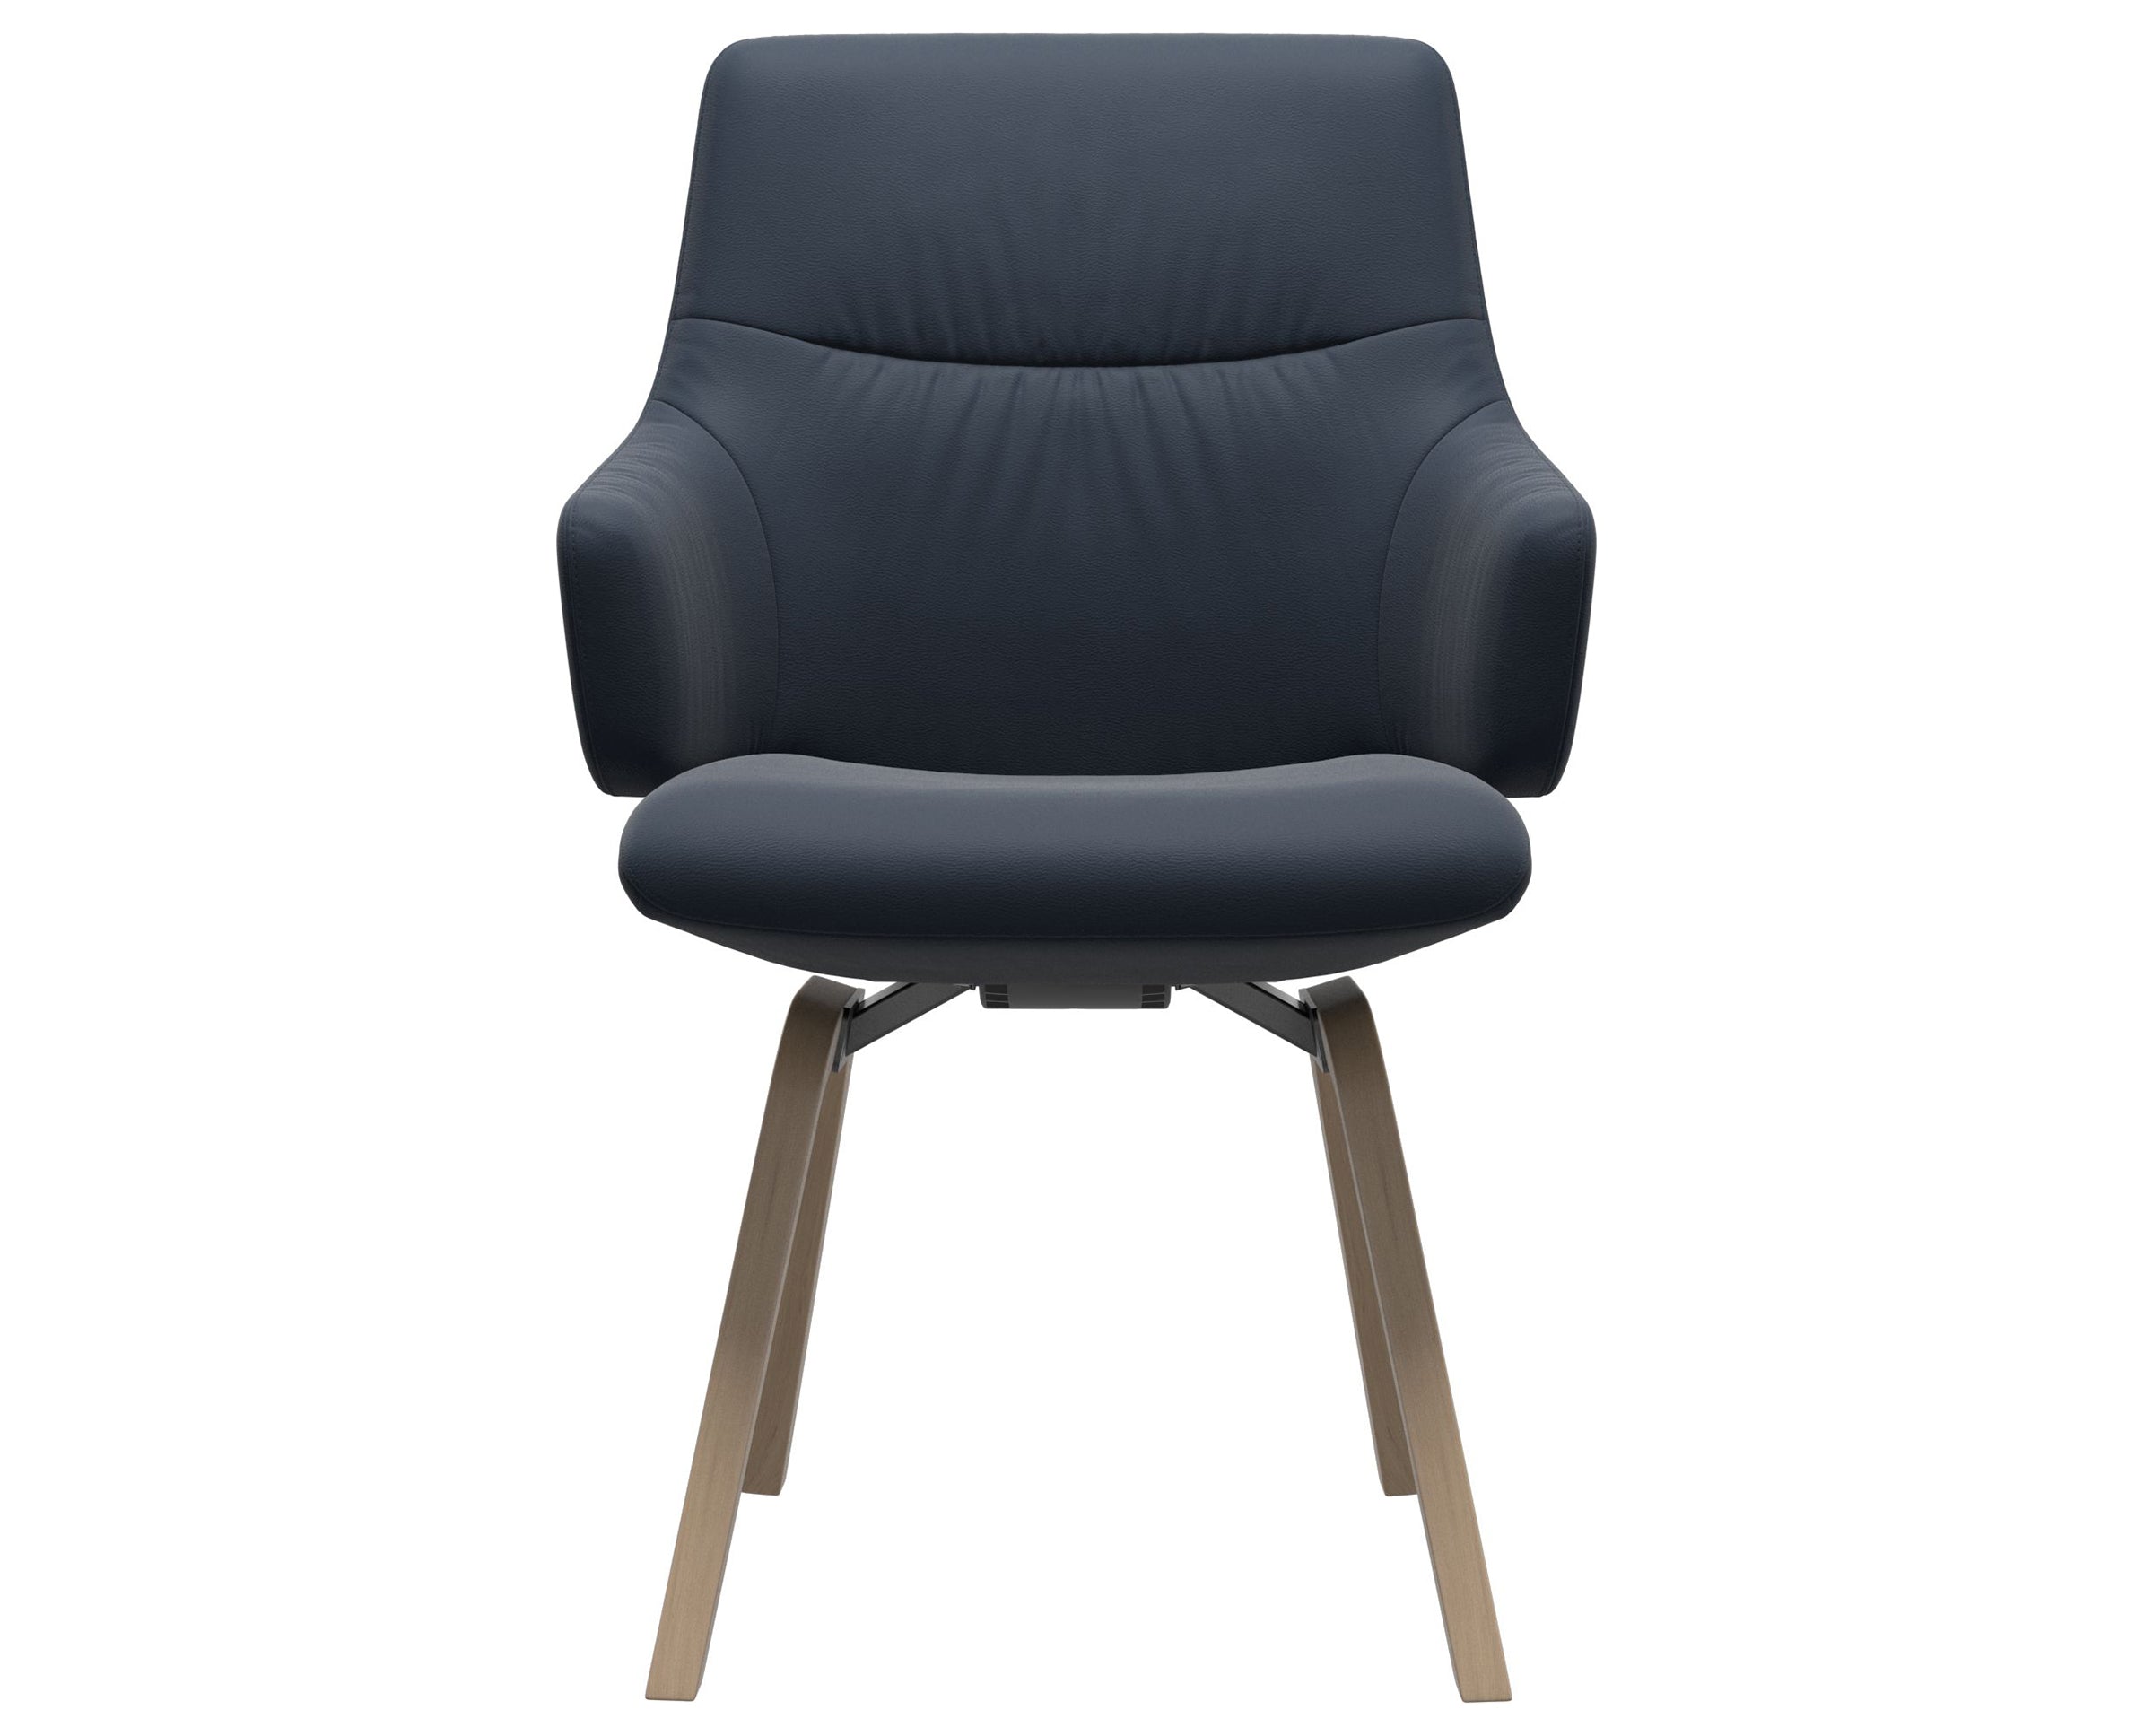 Paloma Leather Oxford Blue and Natural Base | Stressless Mint Low Back D200 Dining Chair w/Arms | Valley Ridge Furniture